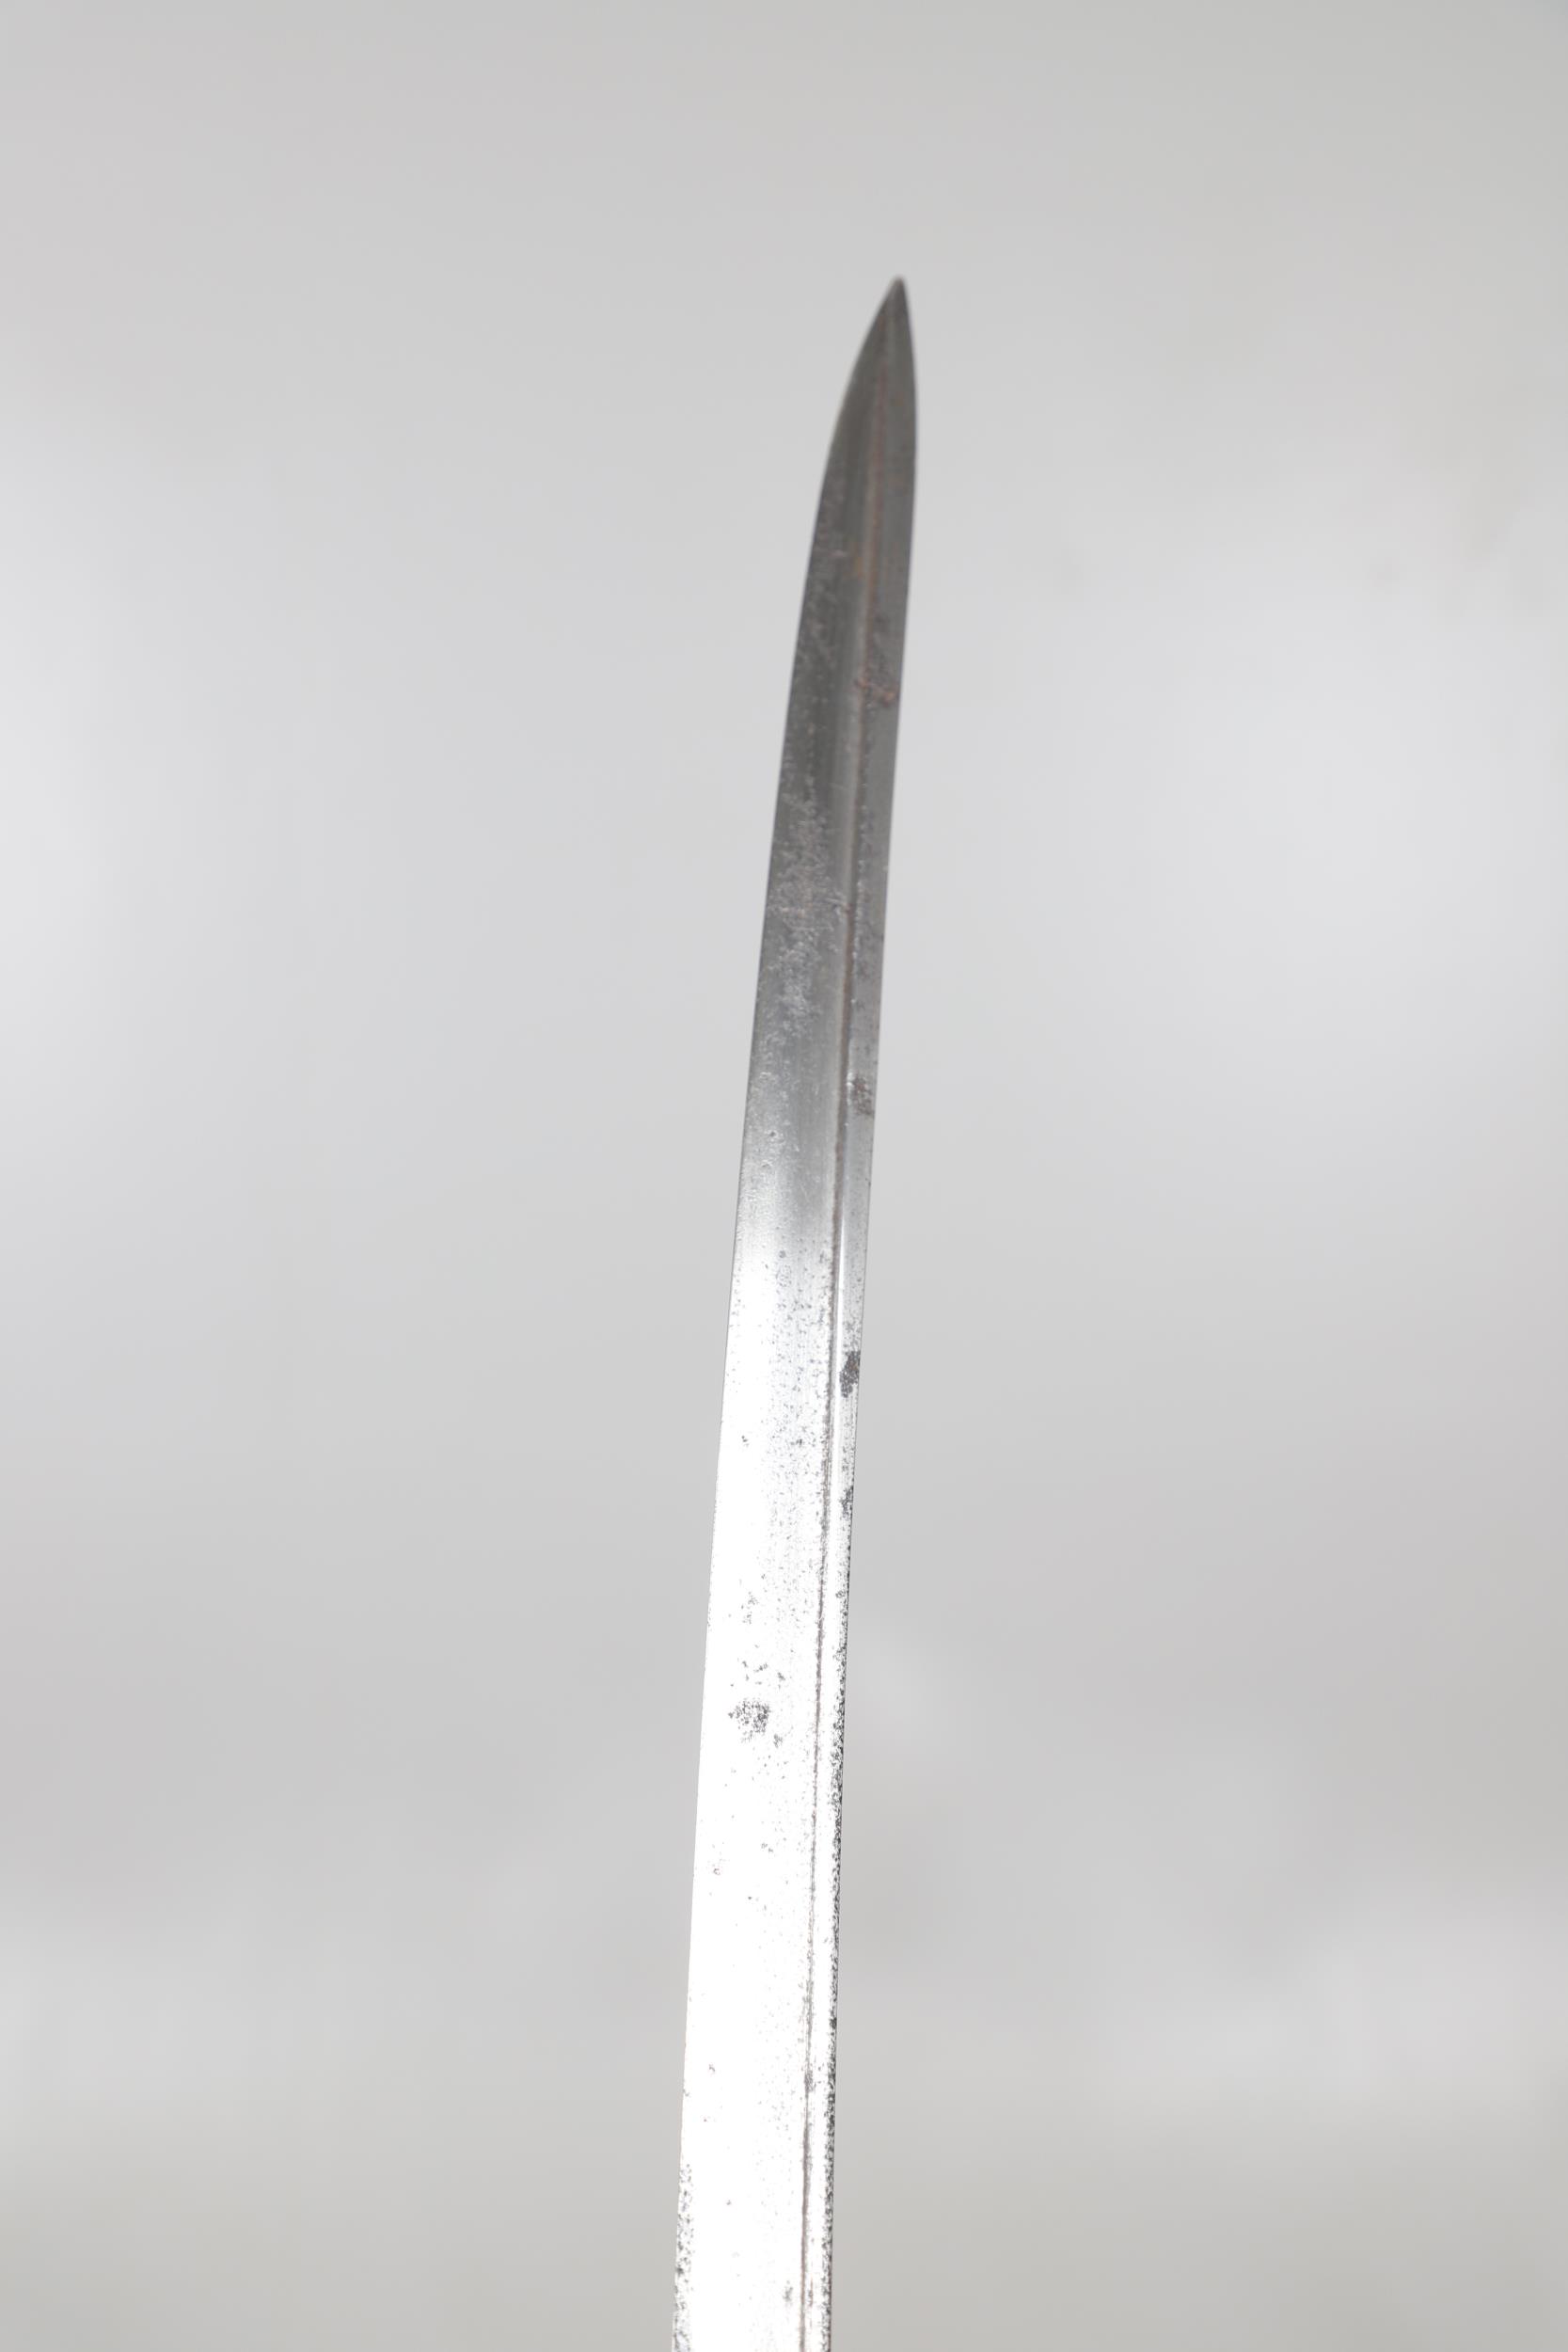 AN 1822 PATTERN LIGHT CAVALRY OFFICER'S SWORD BY BARLOW OF LONDON. - Image 6 of 14